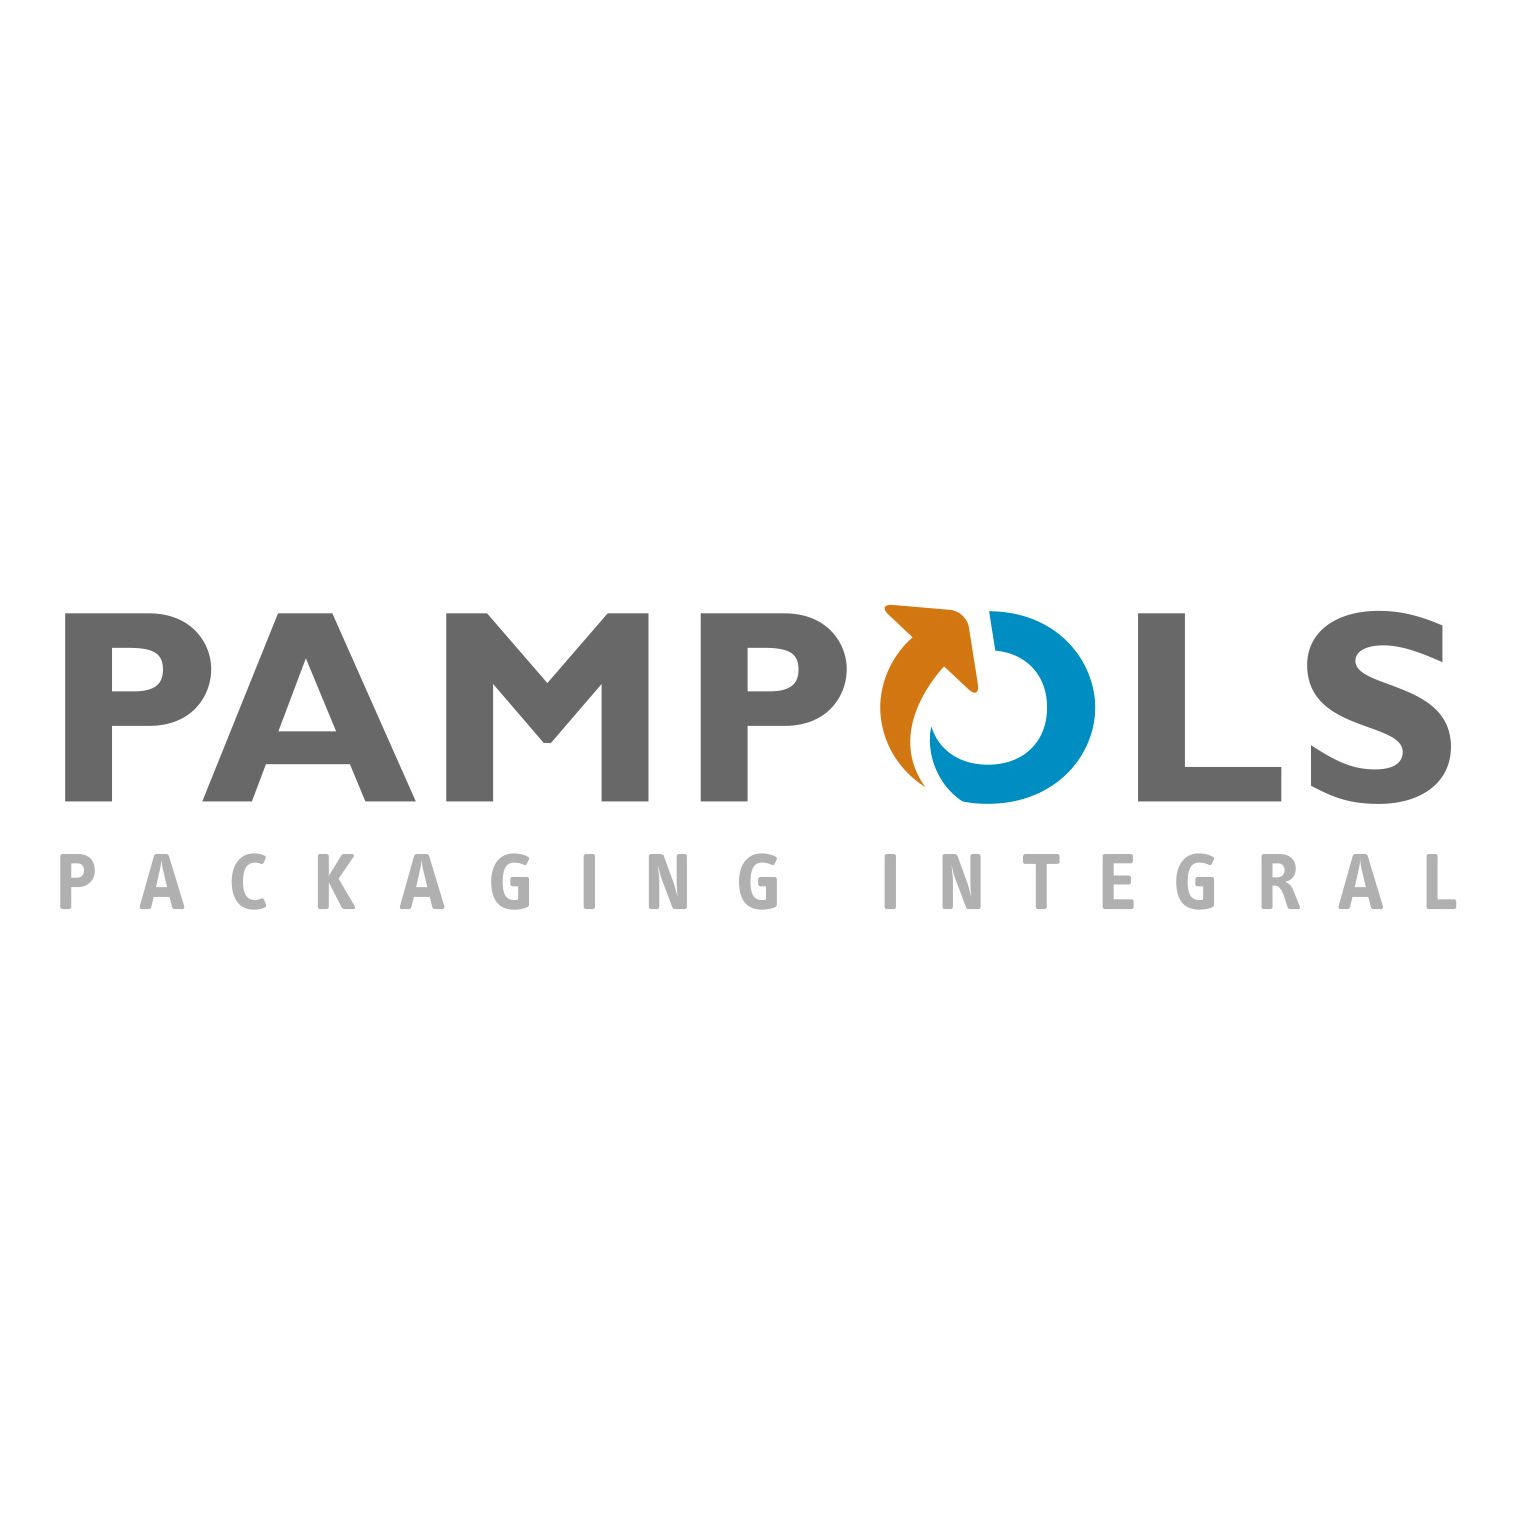 PAMPOLS -Packaging Integral-